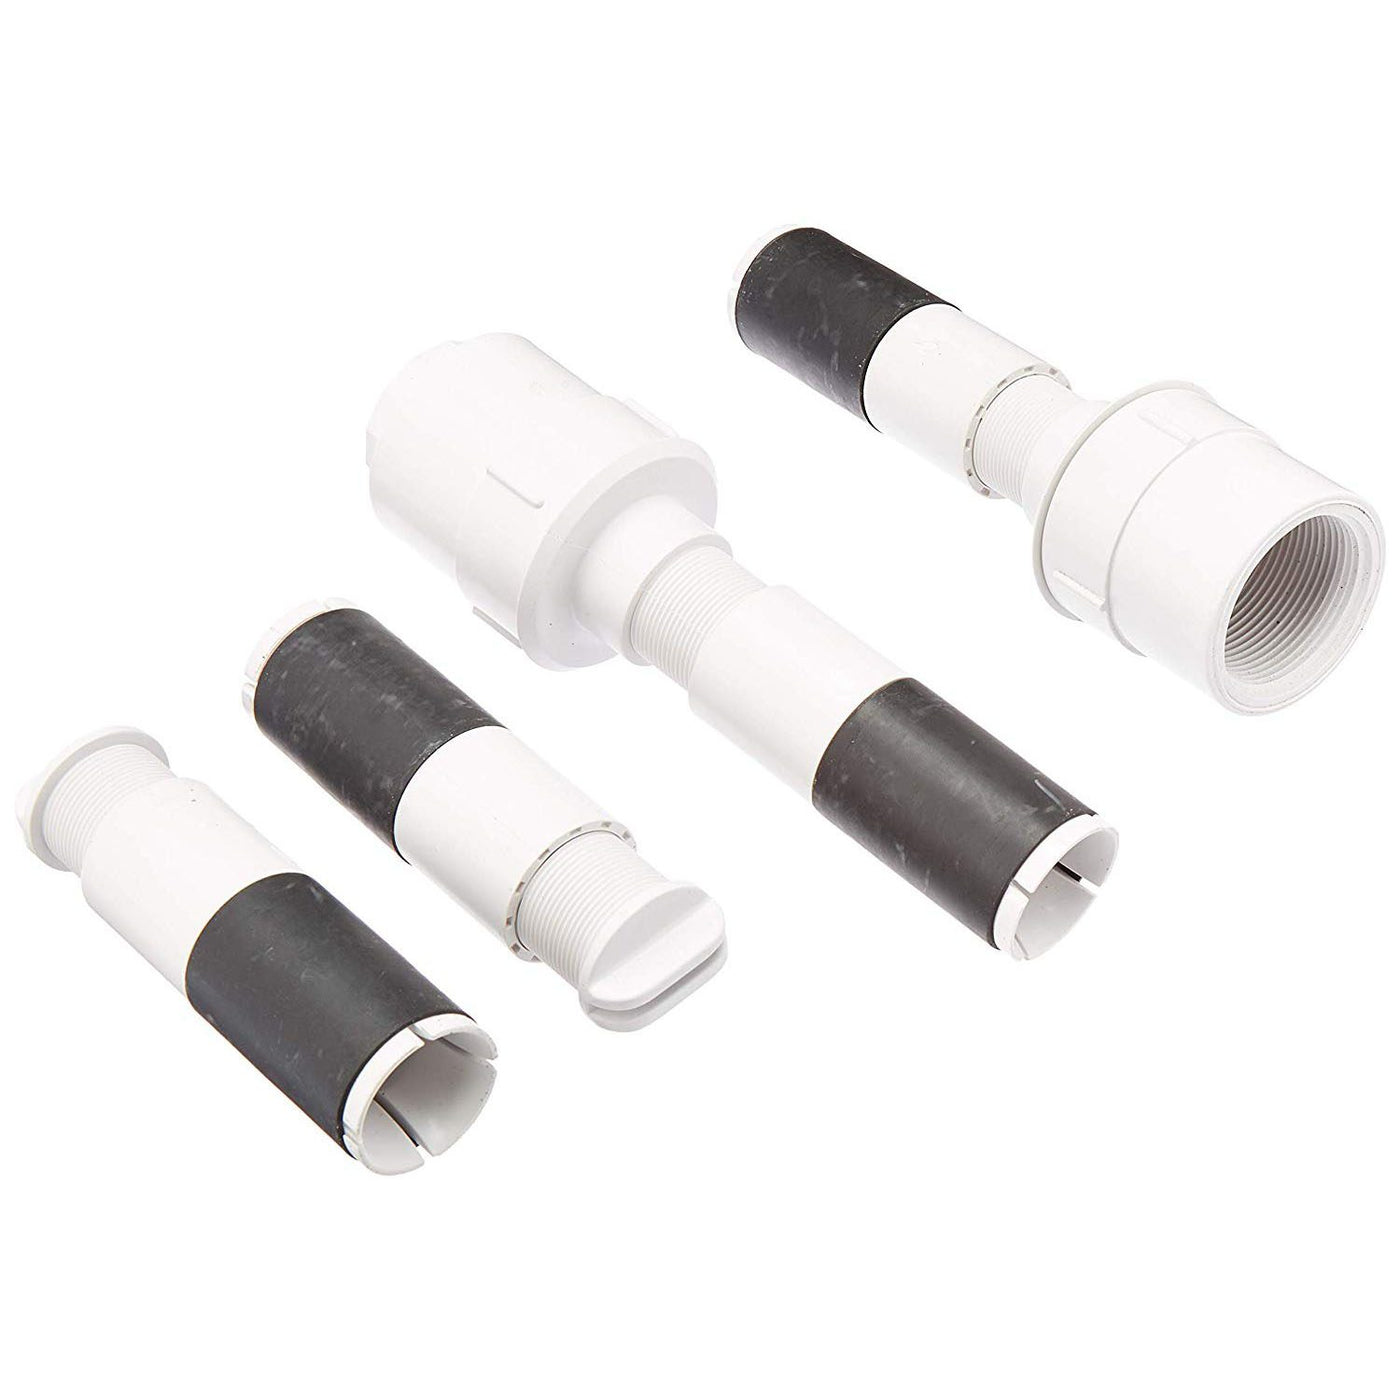 Zodiac 9-100-8003 1 1/2" Stub Pipe Connection Replacement Kit